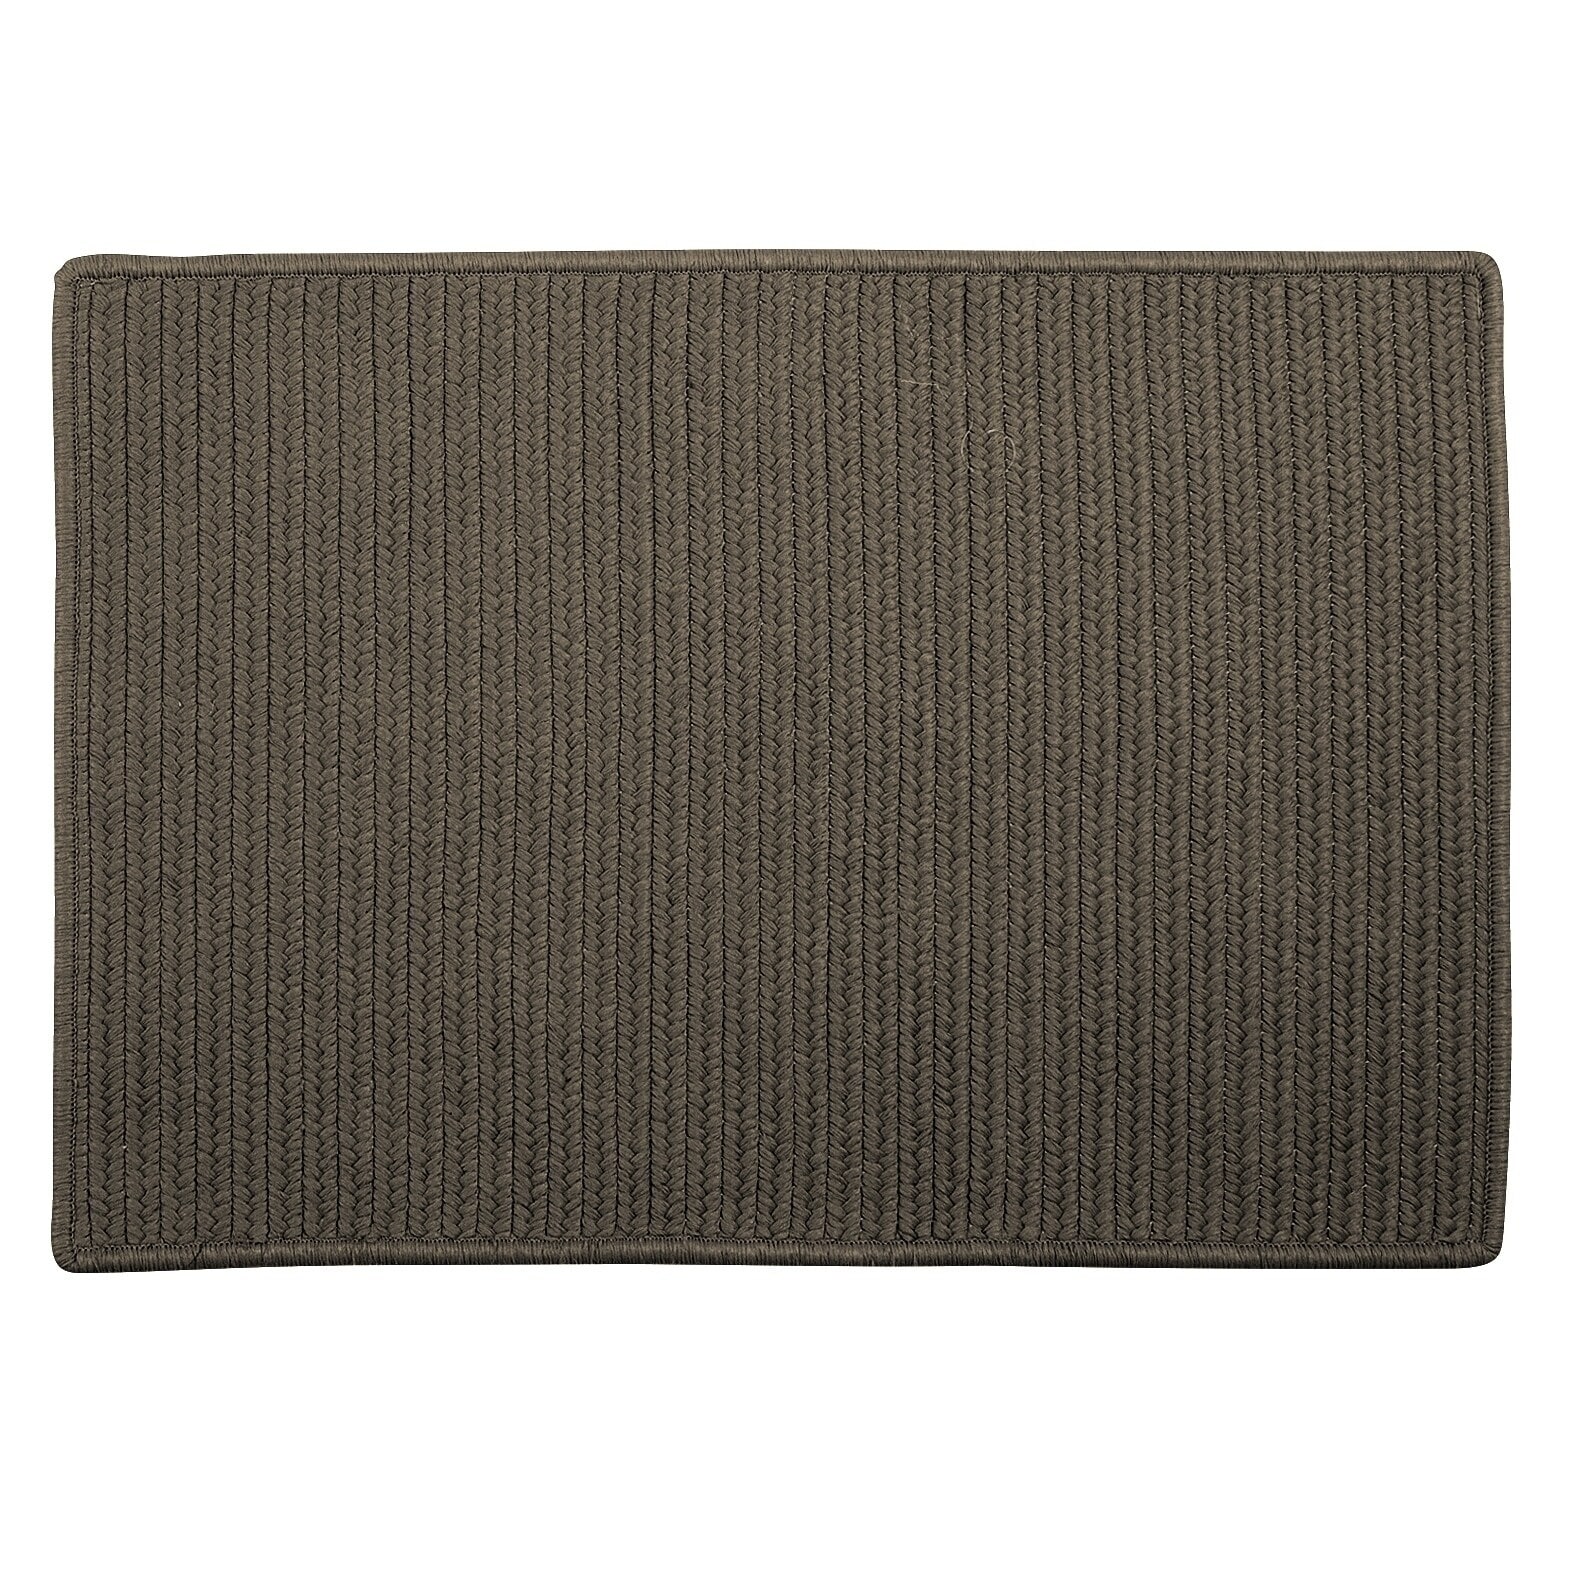 https://ak1.ostkcdn.com/images/products/is/images/direct/01a5fe213bb383351b8541a6eedea34b94604332/Low-profile-Solid-Color-Indoor-Outdoor-Reversible-Braided-Doormat.jpg